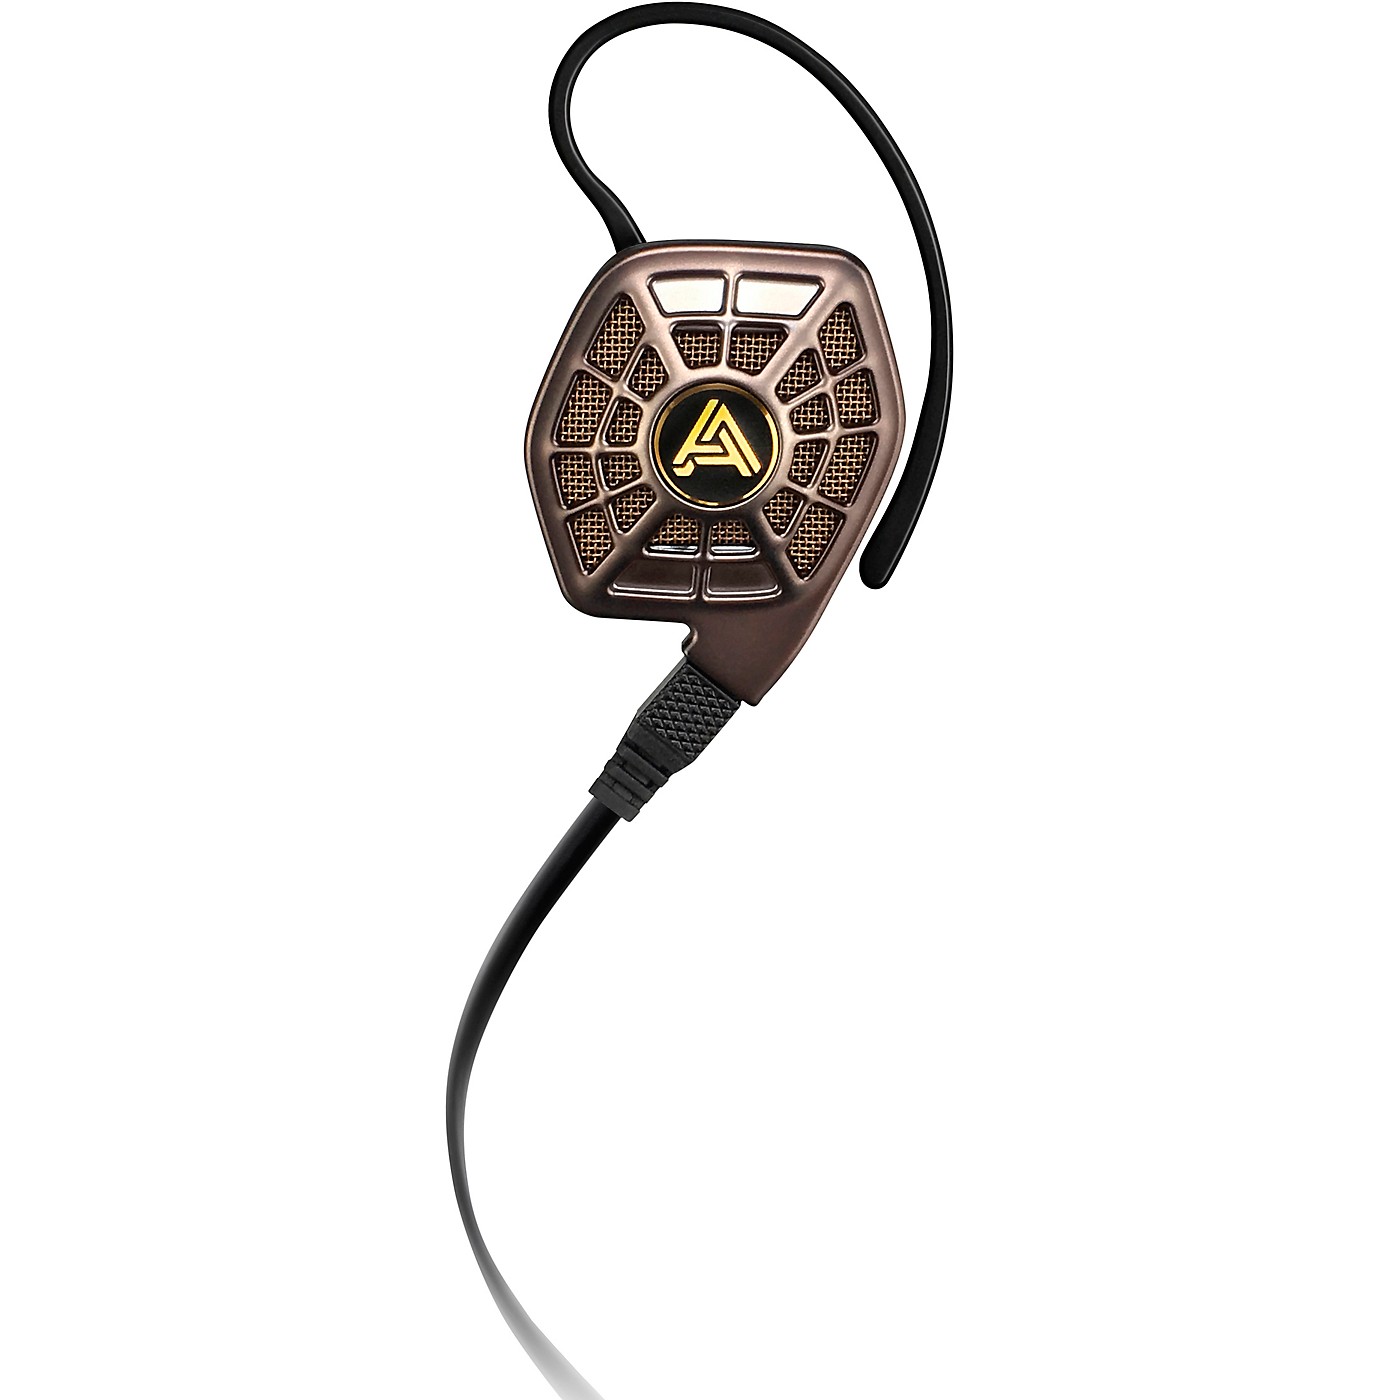 Audeze iSINE 20 In-Ear Headphones with Standard Cable Regular thumbnail